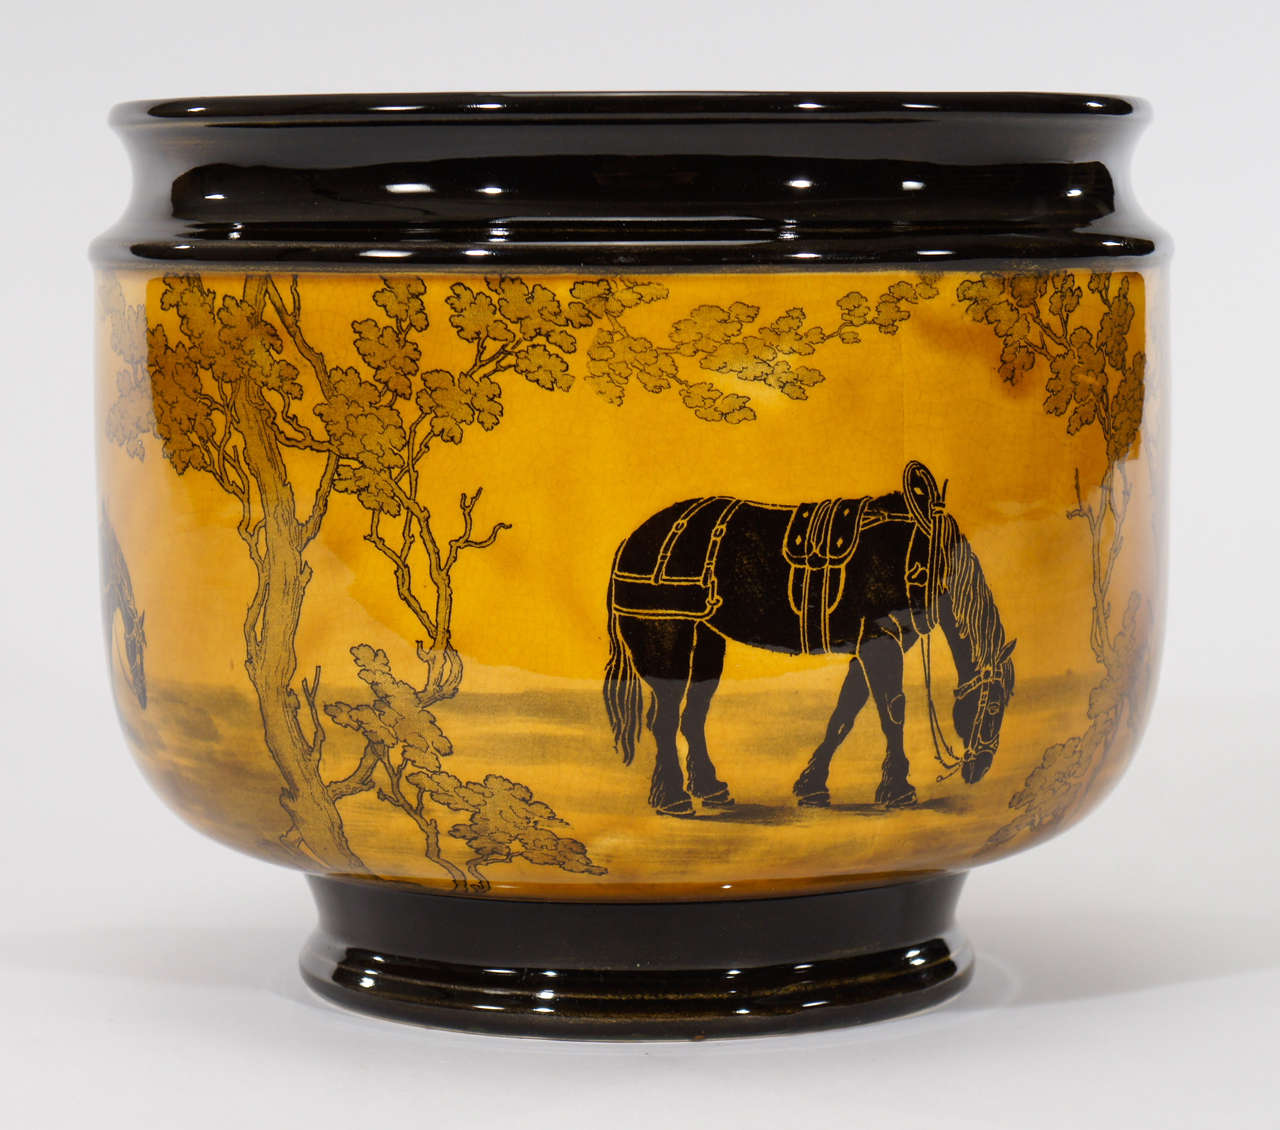 British Royal Doulton Arts and Crafts Jardiniere With Horse Motif/Black Transfer 